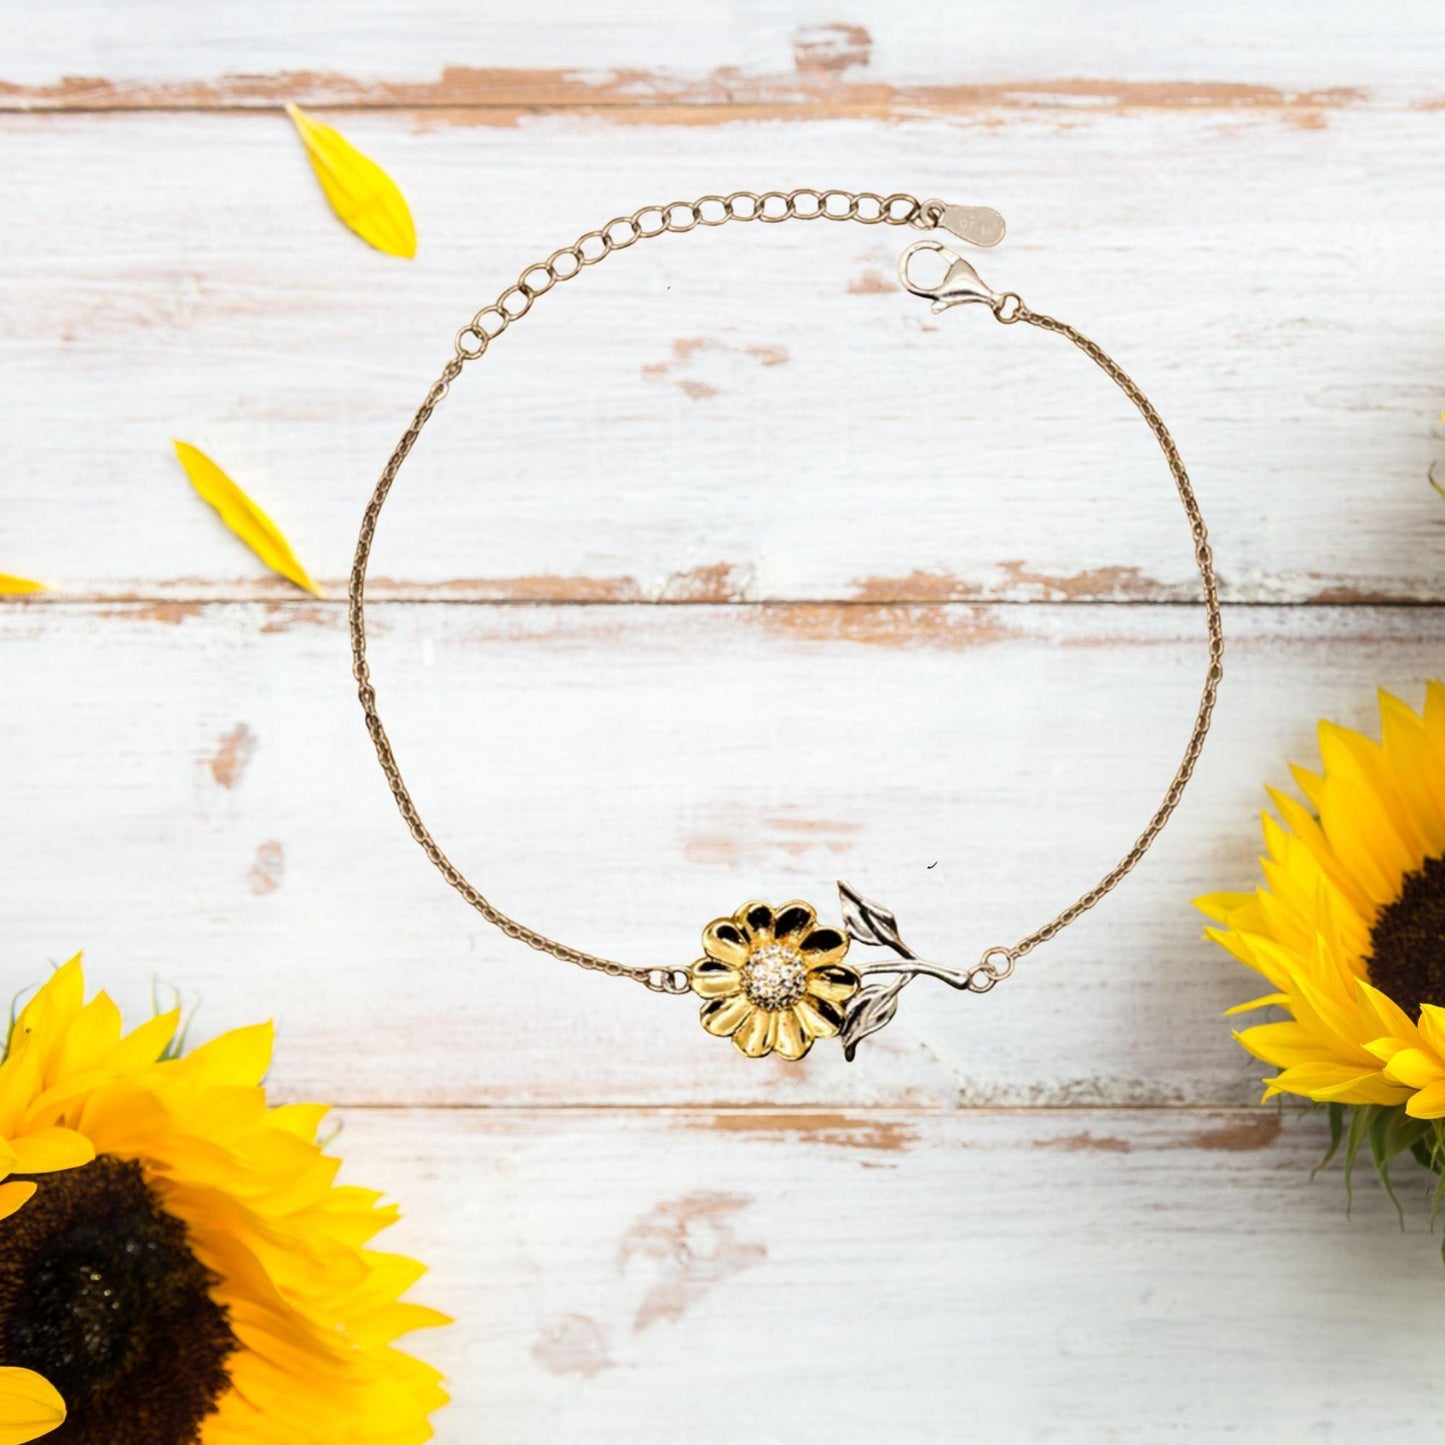 Remarkable Mental Health Counselor Gifts, Your dedication and hard work, Inspirational Birthday Christmas Unique Sunflower Bracelet For Mental Health Counselor, Coworkers, Men, Women, Friends - Mallard Moon Gift Shop